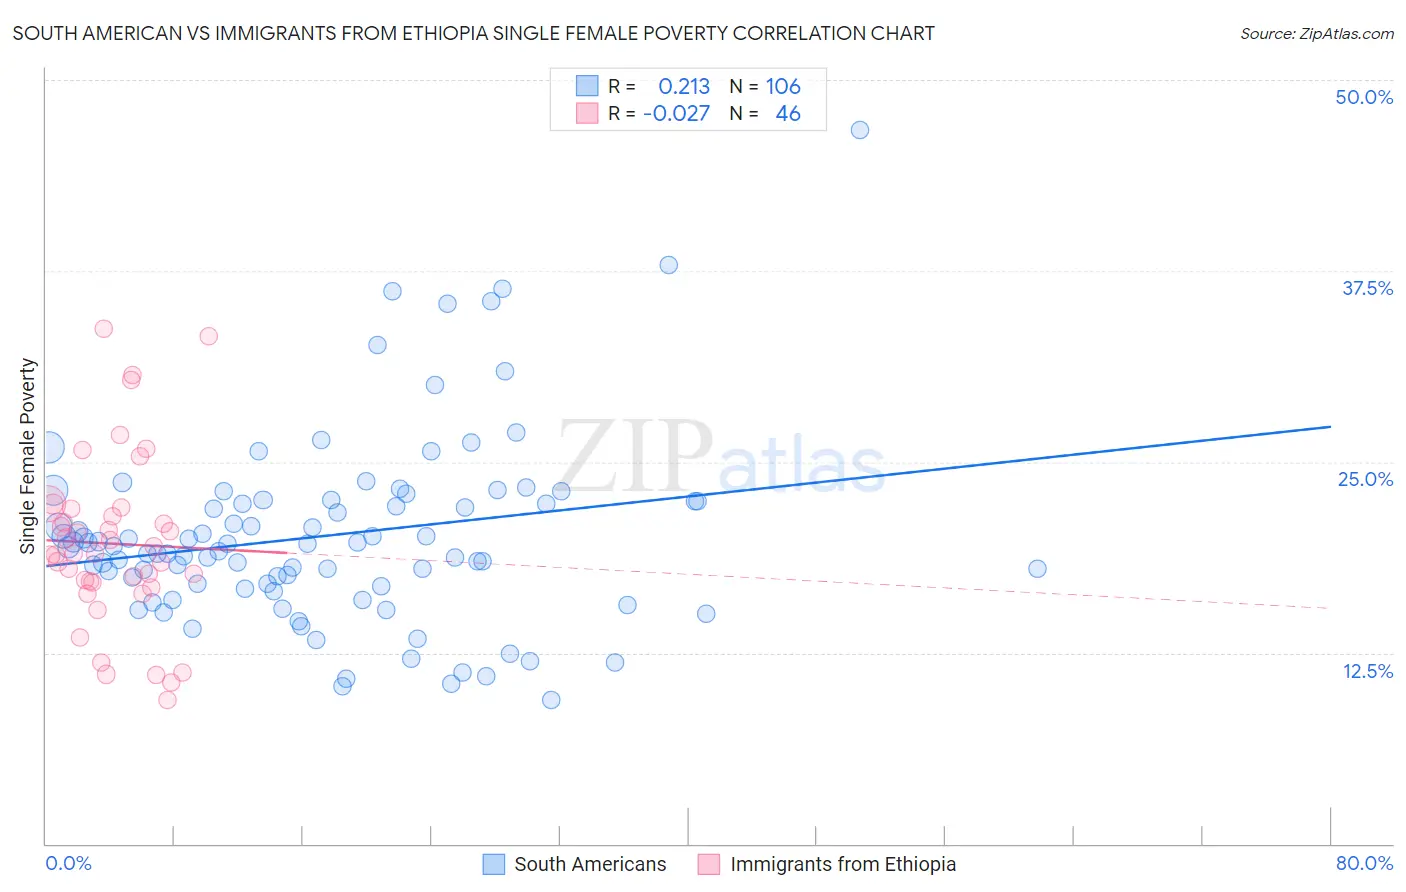 South American vs Immigrants from Ethiopia Single Female Poverty